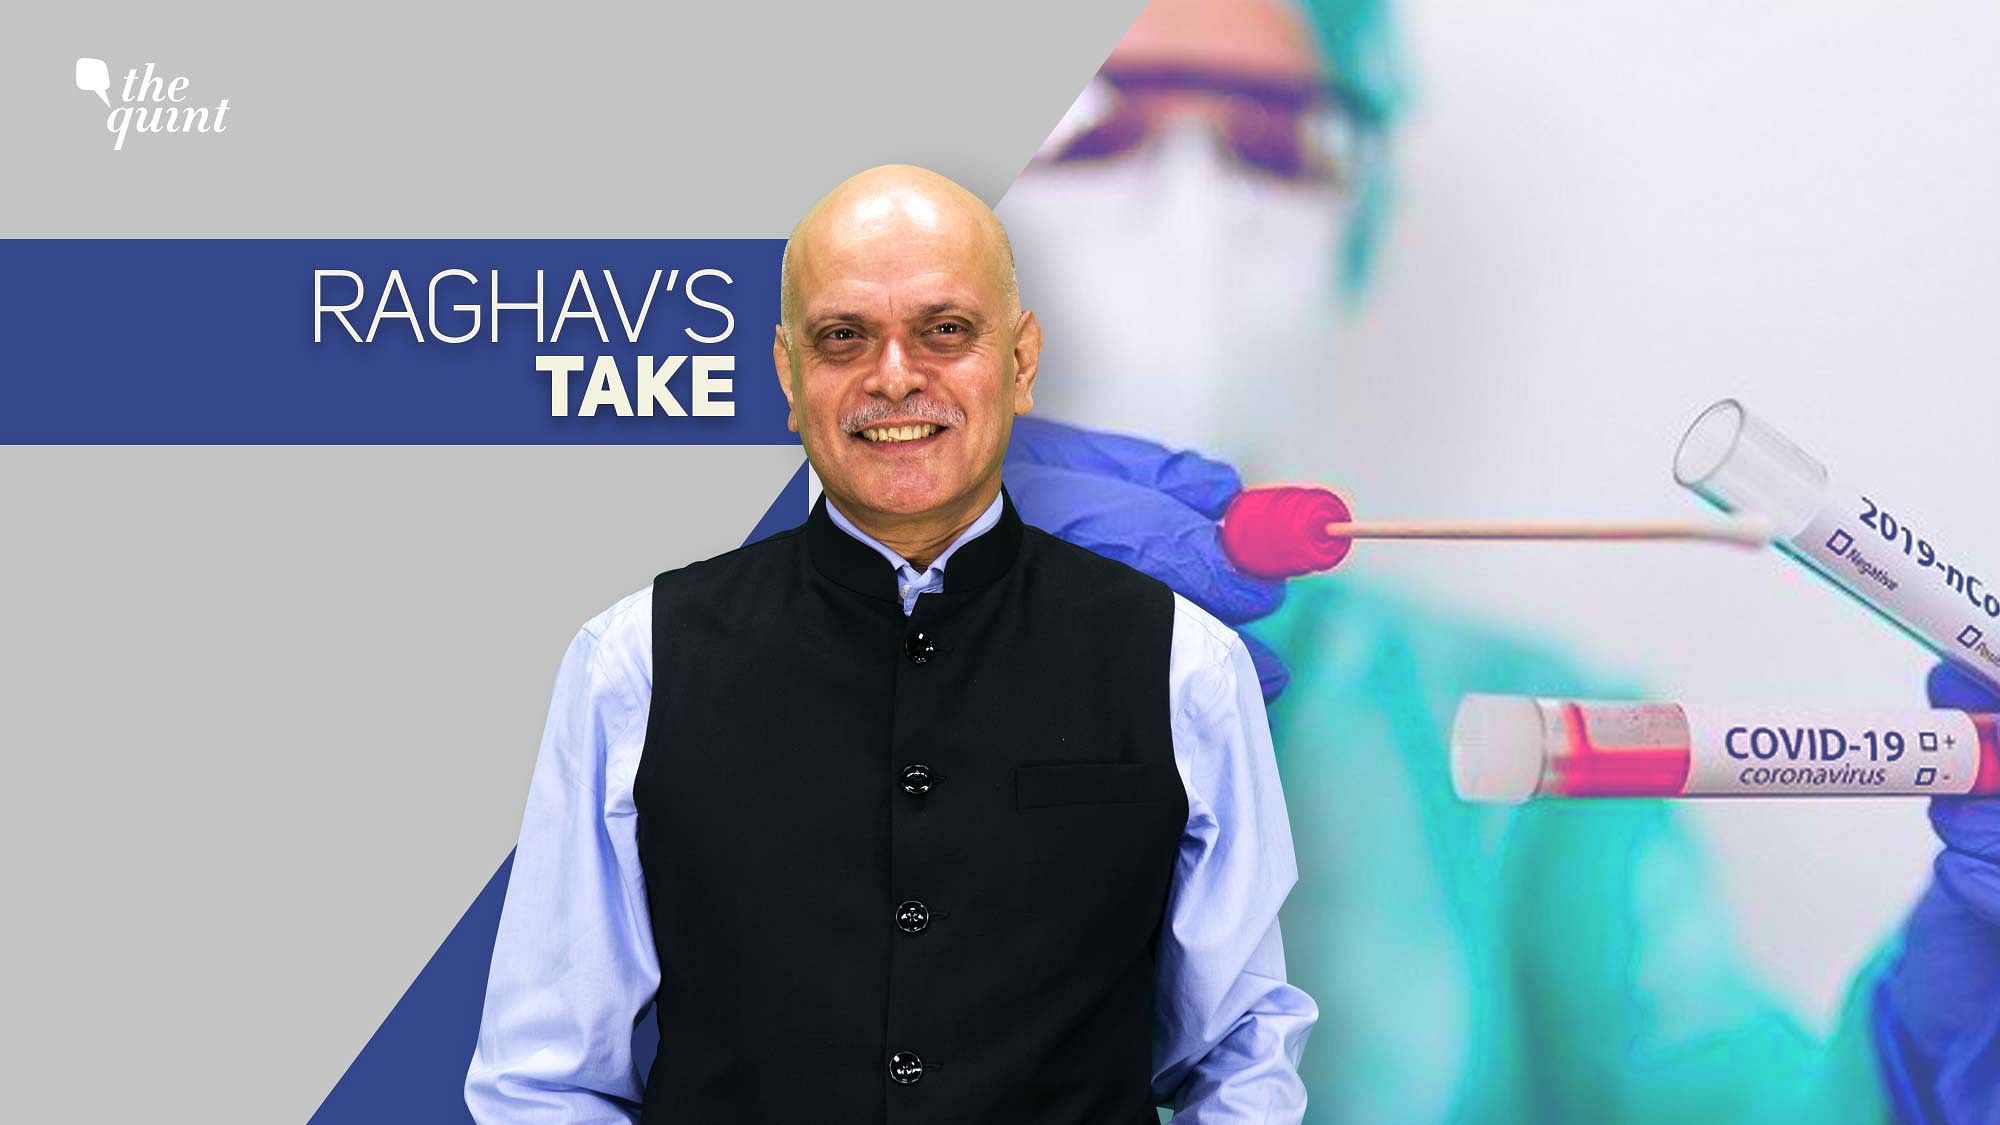 <div class="paragraphs"><p>COVID-19 to CII's request, The Quint’s Editor-in-Chief Raghav Bahl shares his views on pertinent developments.</p></div>